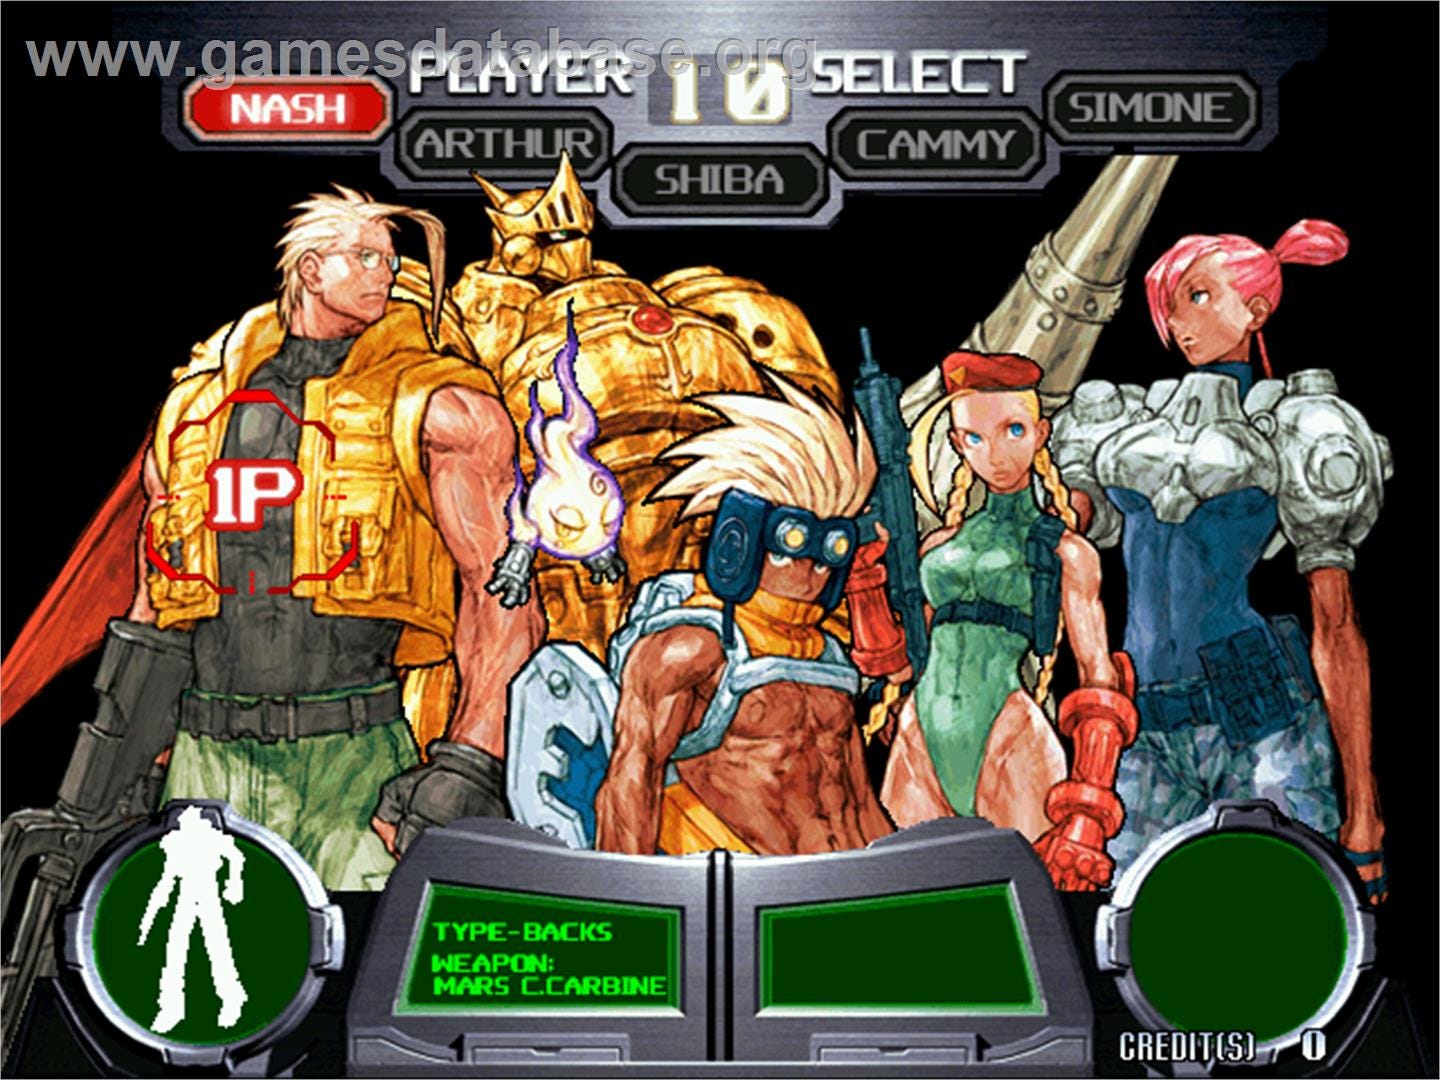 A screenshot of the character select screen, featuring Nash (Charlie in the North American release), Arthur, Shiba, Cammy, and Simone, in their excellent character portrait form